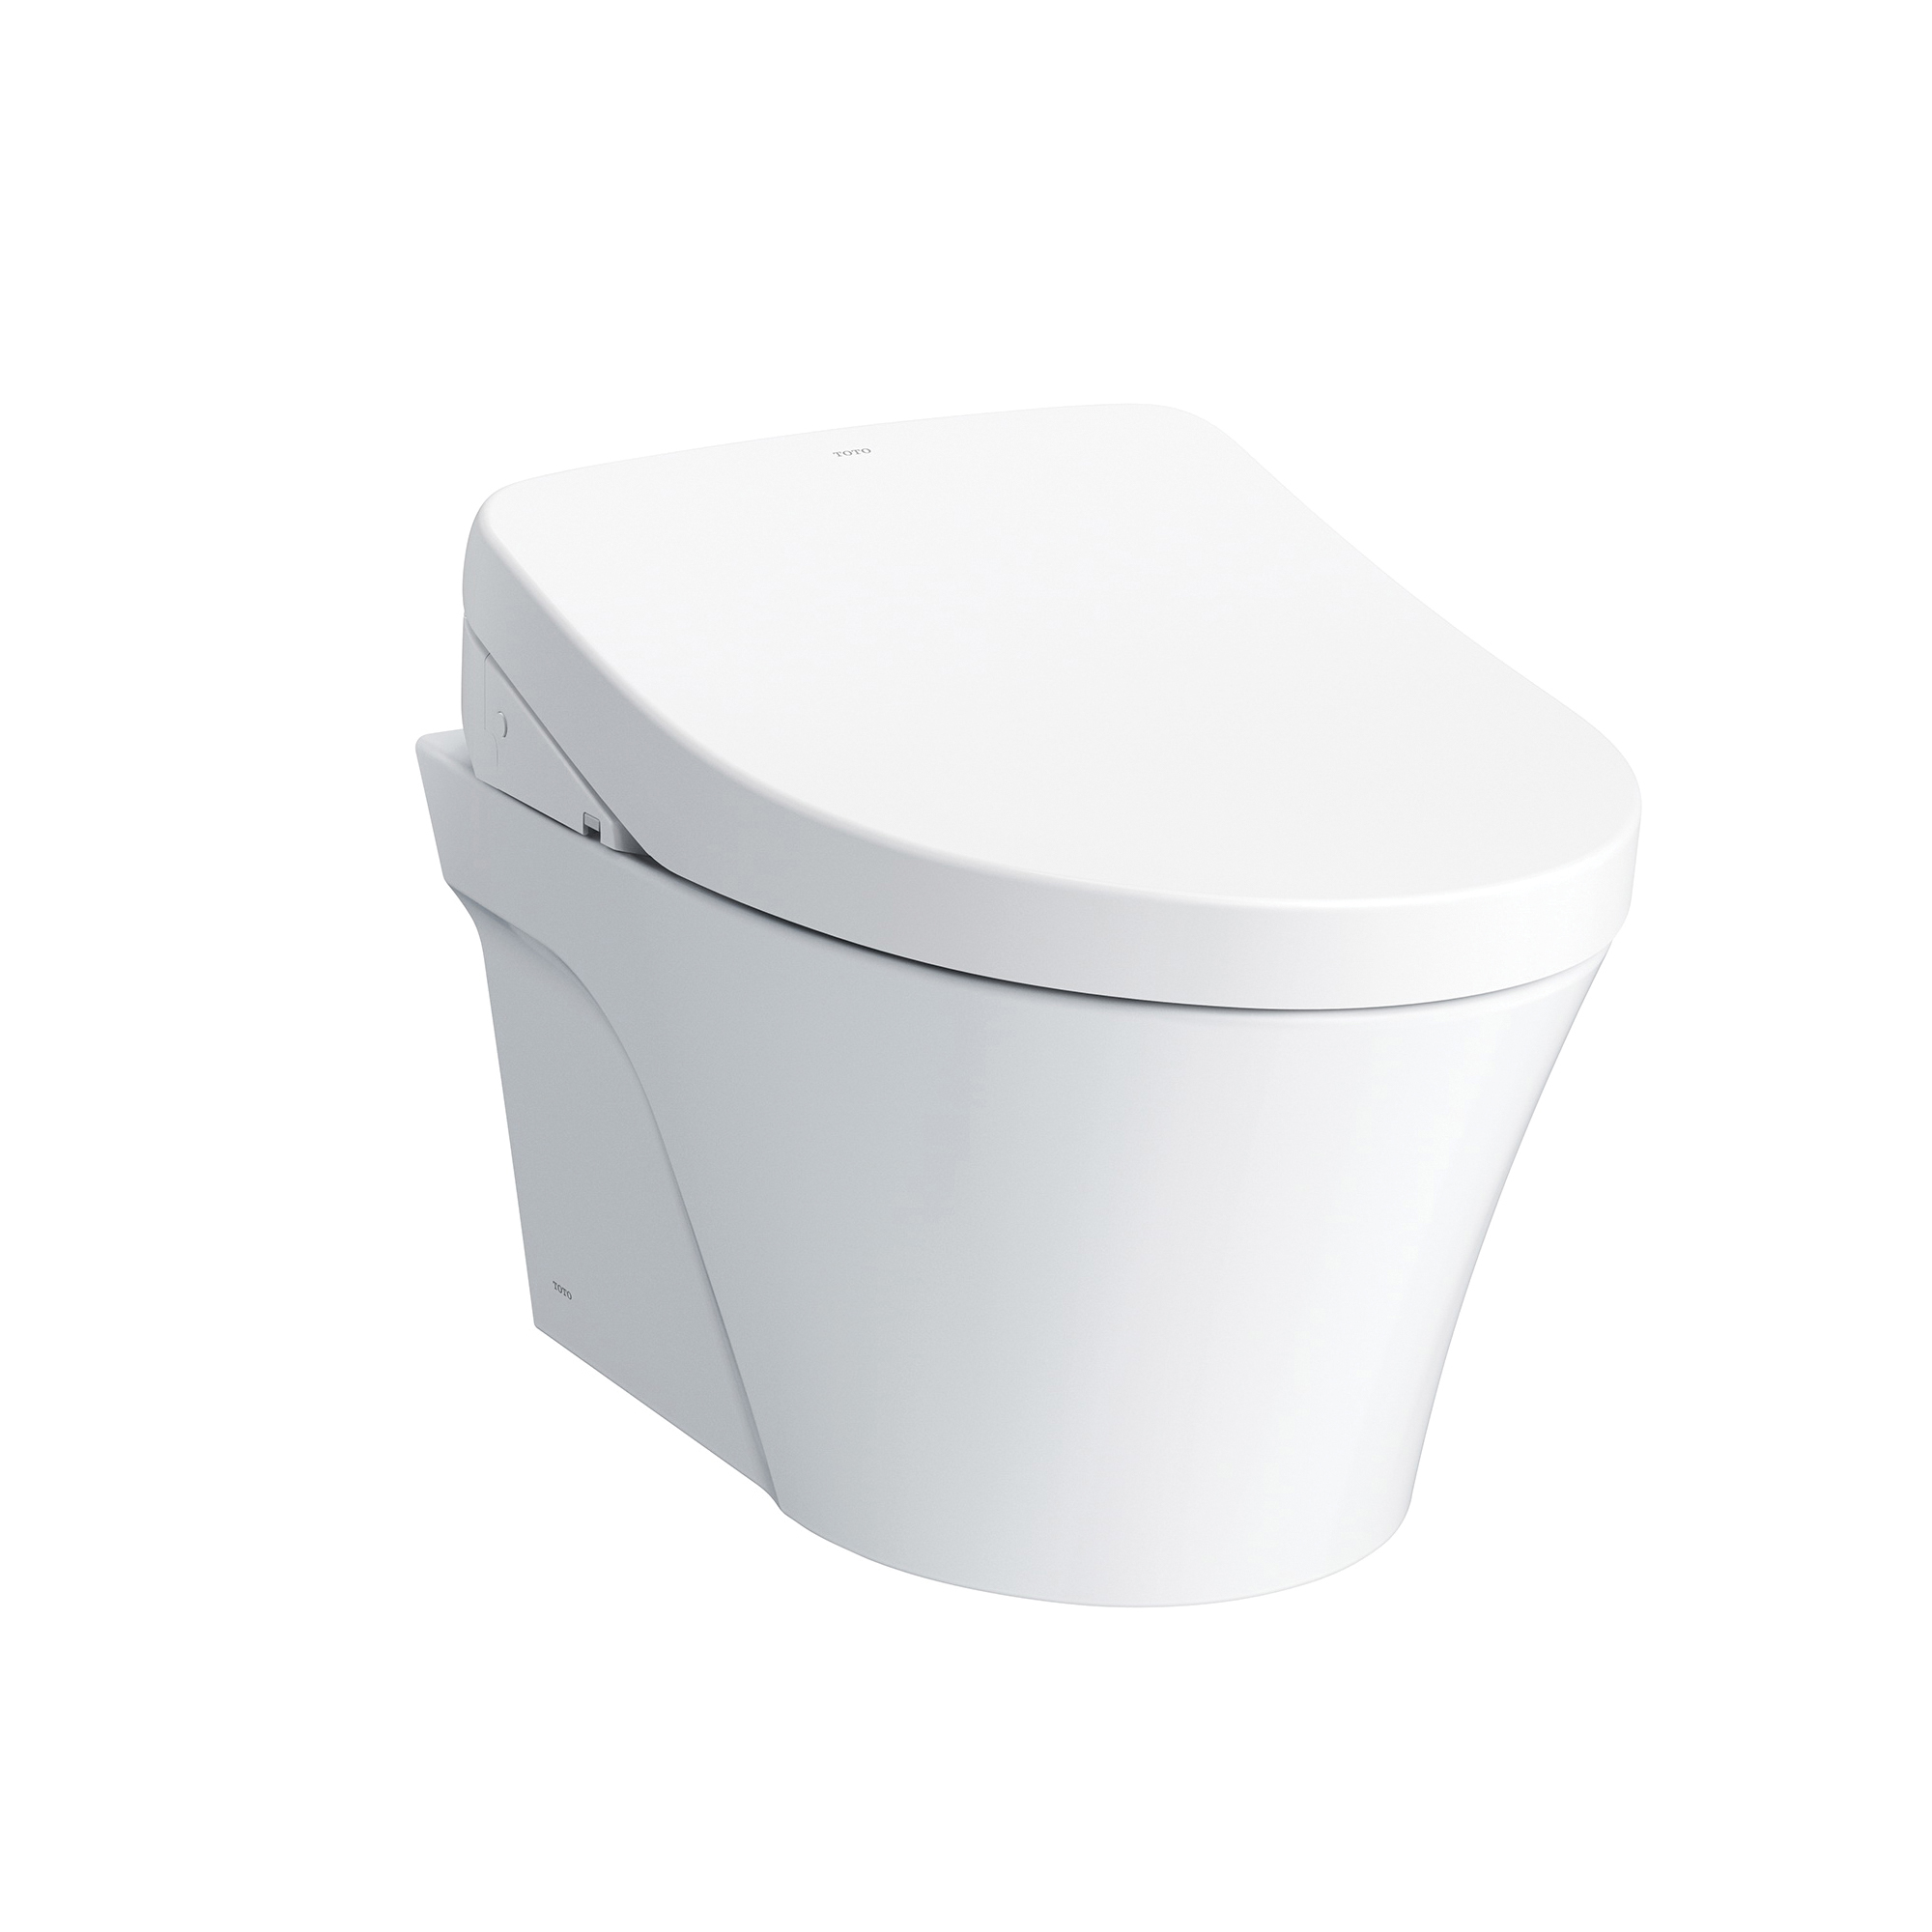 Toto® CWT4263056CMFGA#MS Skirted Design Toilet With CEFIONTECT® Ceramic Glaze, Elongated Bowl, 16-1/8 in H Rim, 0.9/1.28 gpf, Matte Silver, Import